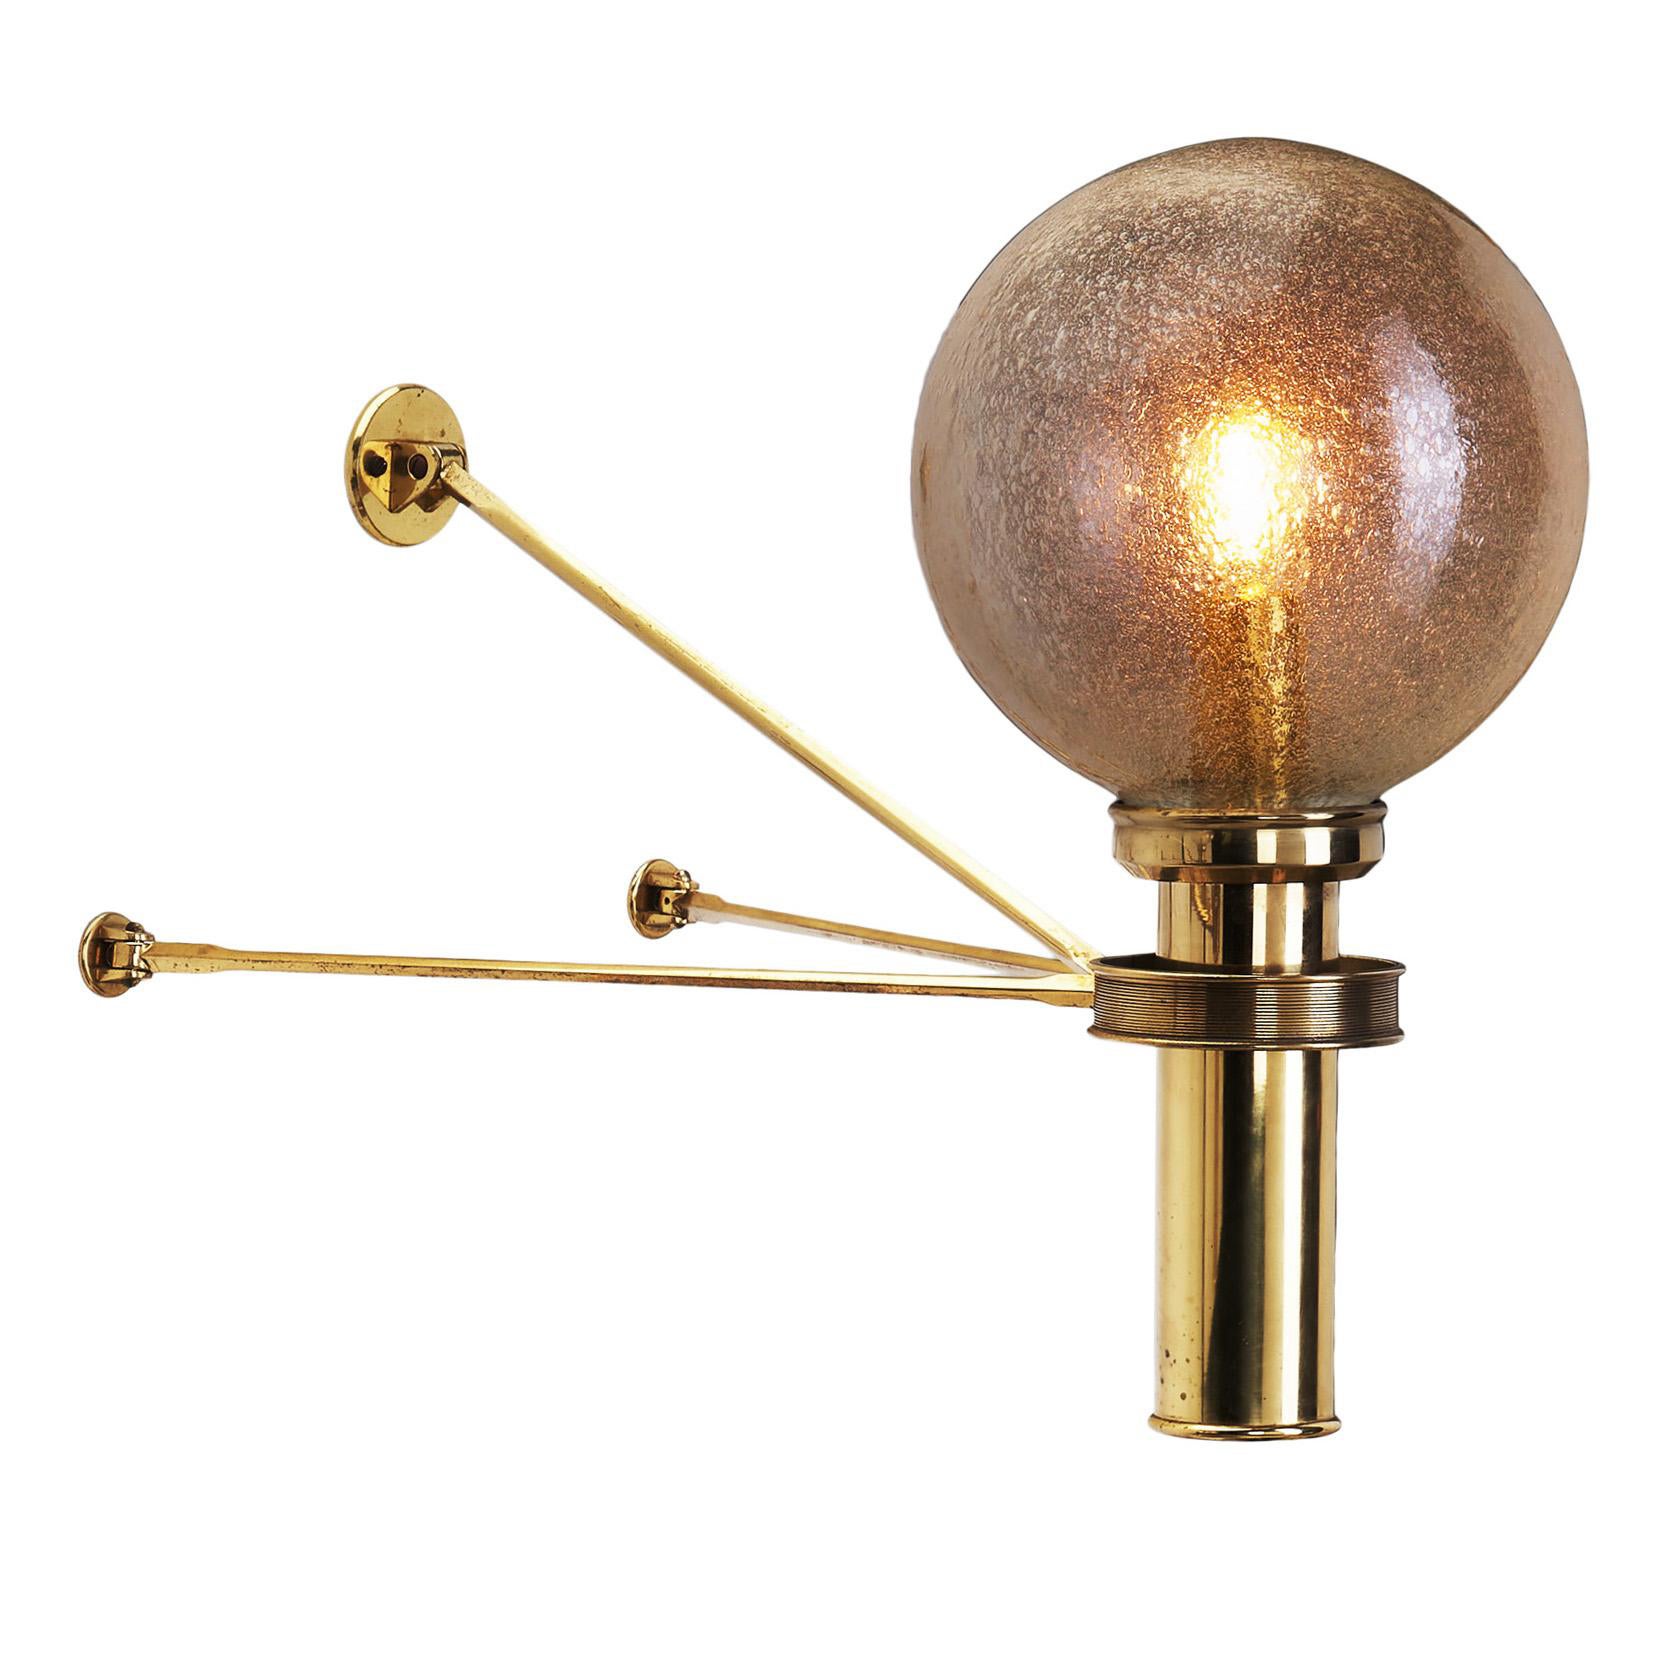 Large European Modern Wall Sconce in Brass & Bubble Glass, Europe circa 1950s For Sale